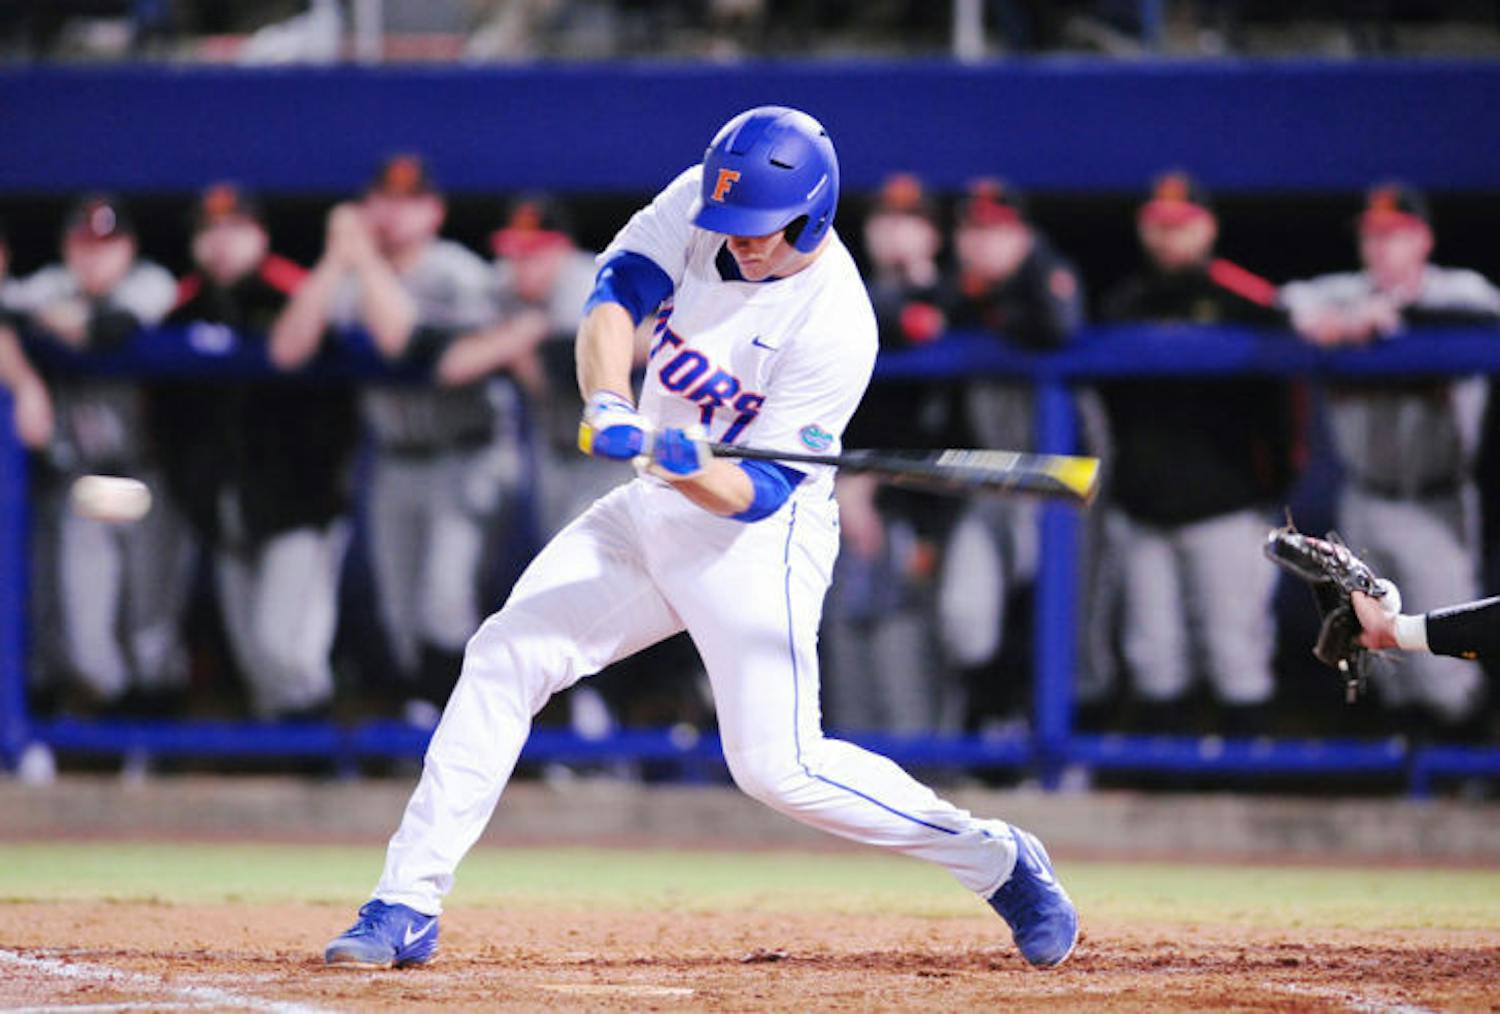 Taylor Gushue swings at a pitch during Florida’s 4-0 win against Maryland on Friday at McKethan Stadium.&nbsp;